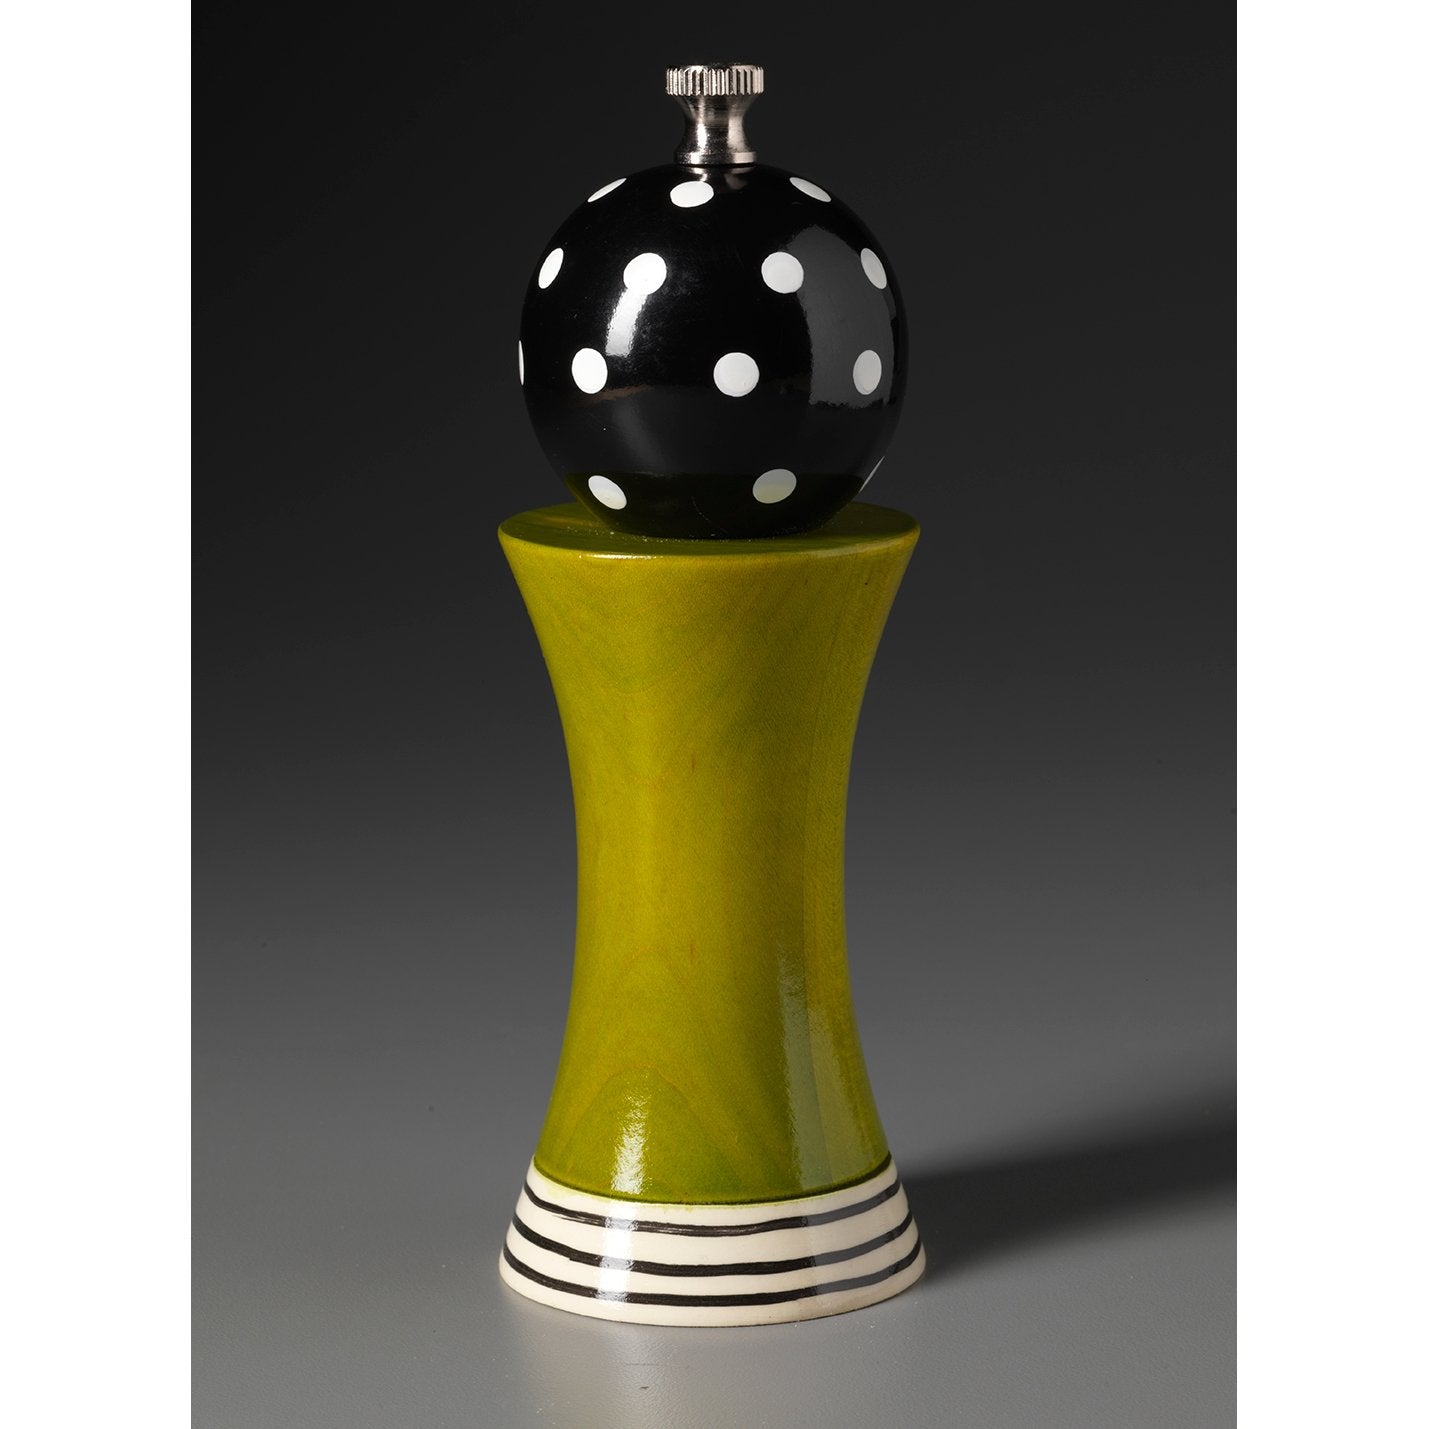 Grooved in Turquoise, Lime, and Black Wooden Salt and Pepper Mill Grinder  Shaker by Robert Wilhelm of Raw Design